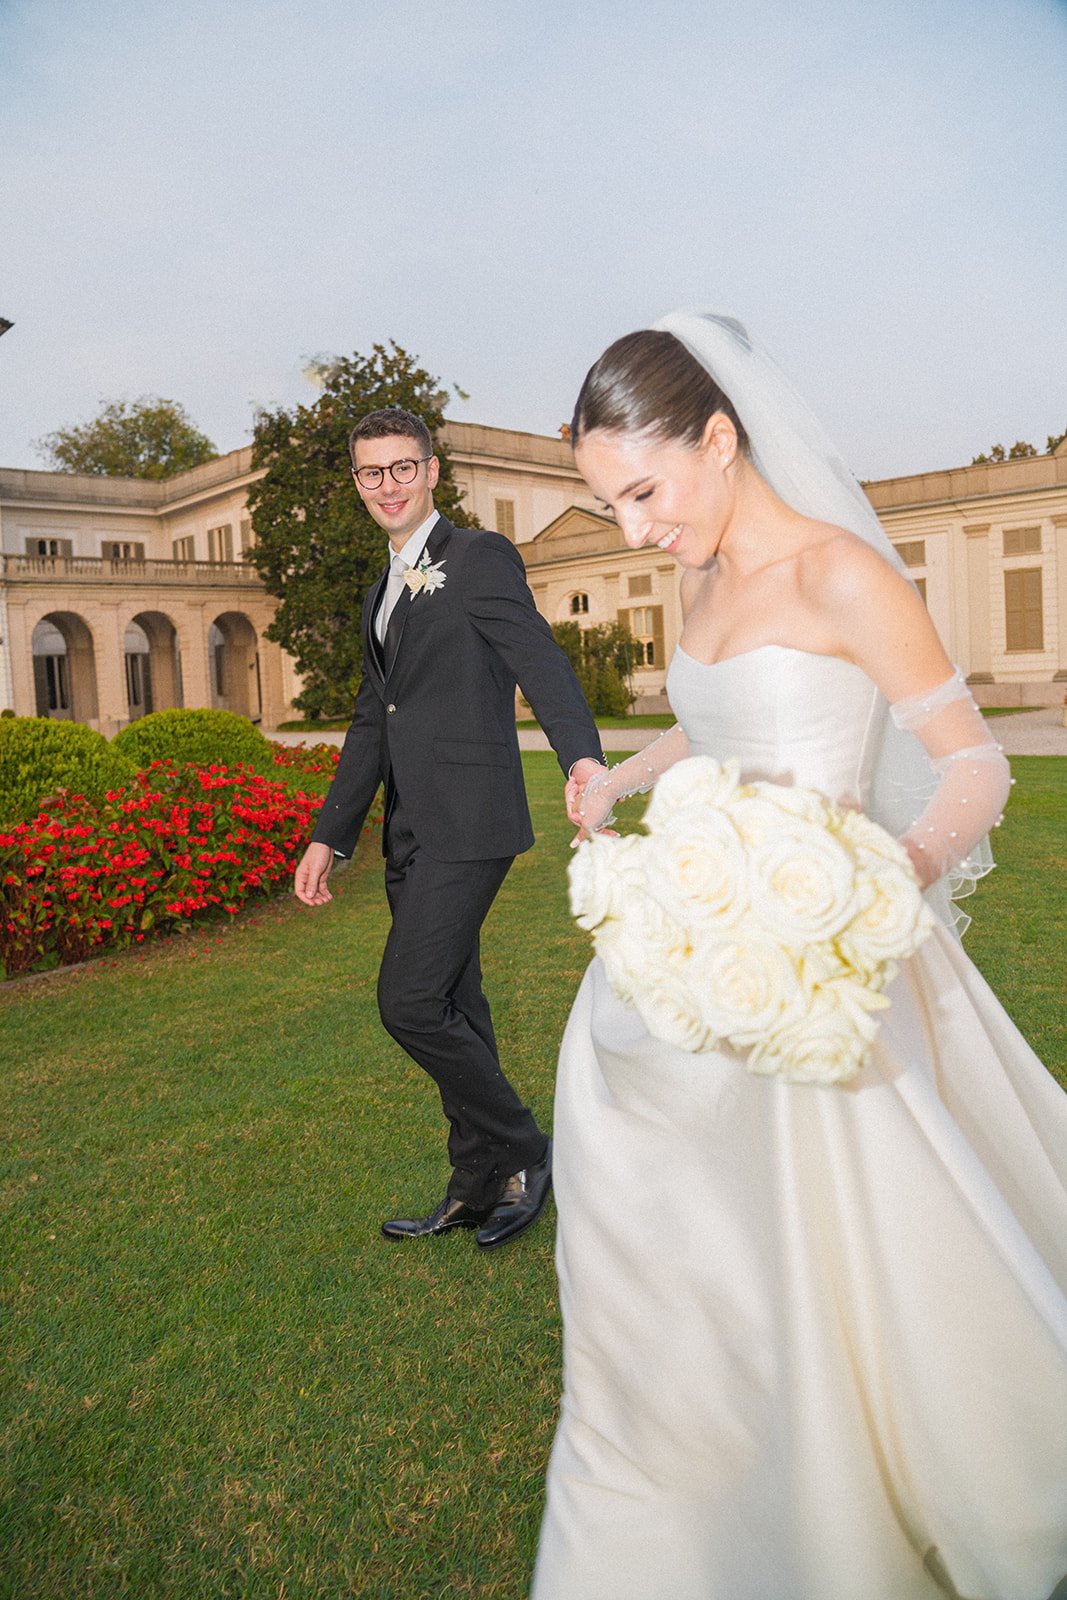 A Sophisticated Wedding in an 18th-Century Italian Villa - Wed Vibes